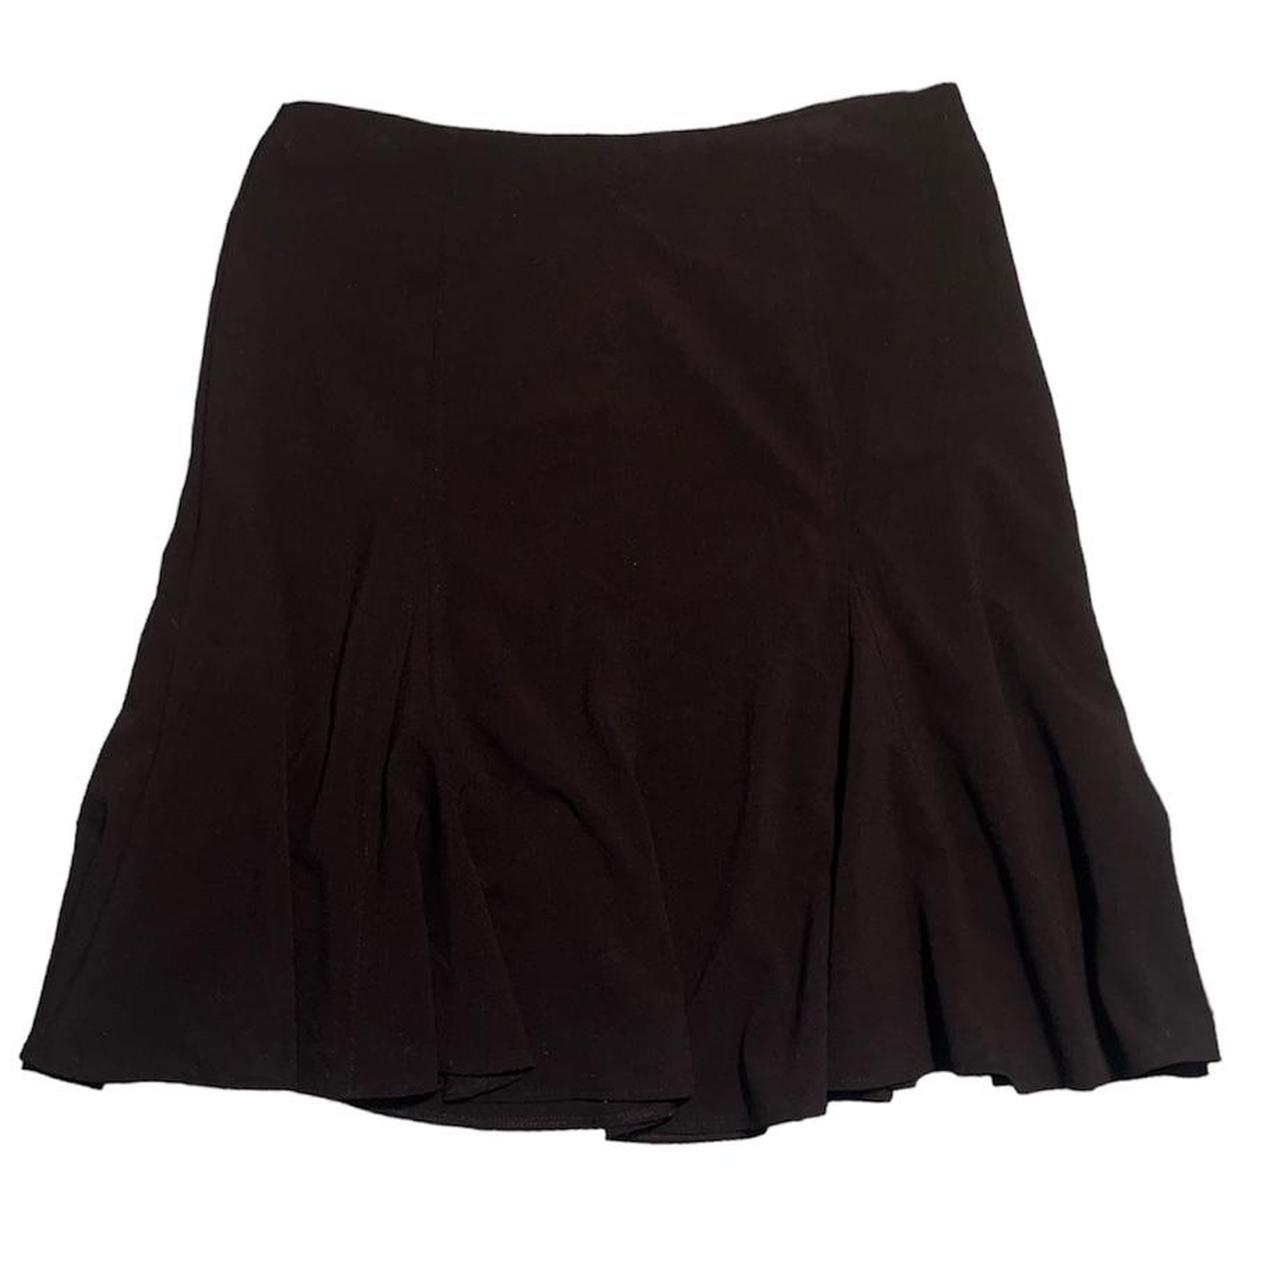 beautiful pleated black skirt perfect for dressing... - Depop